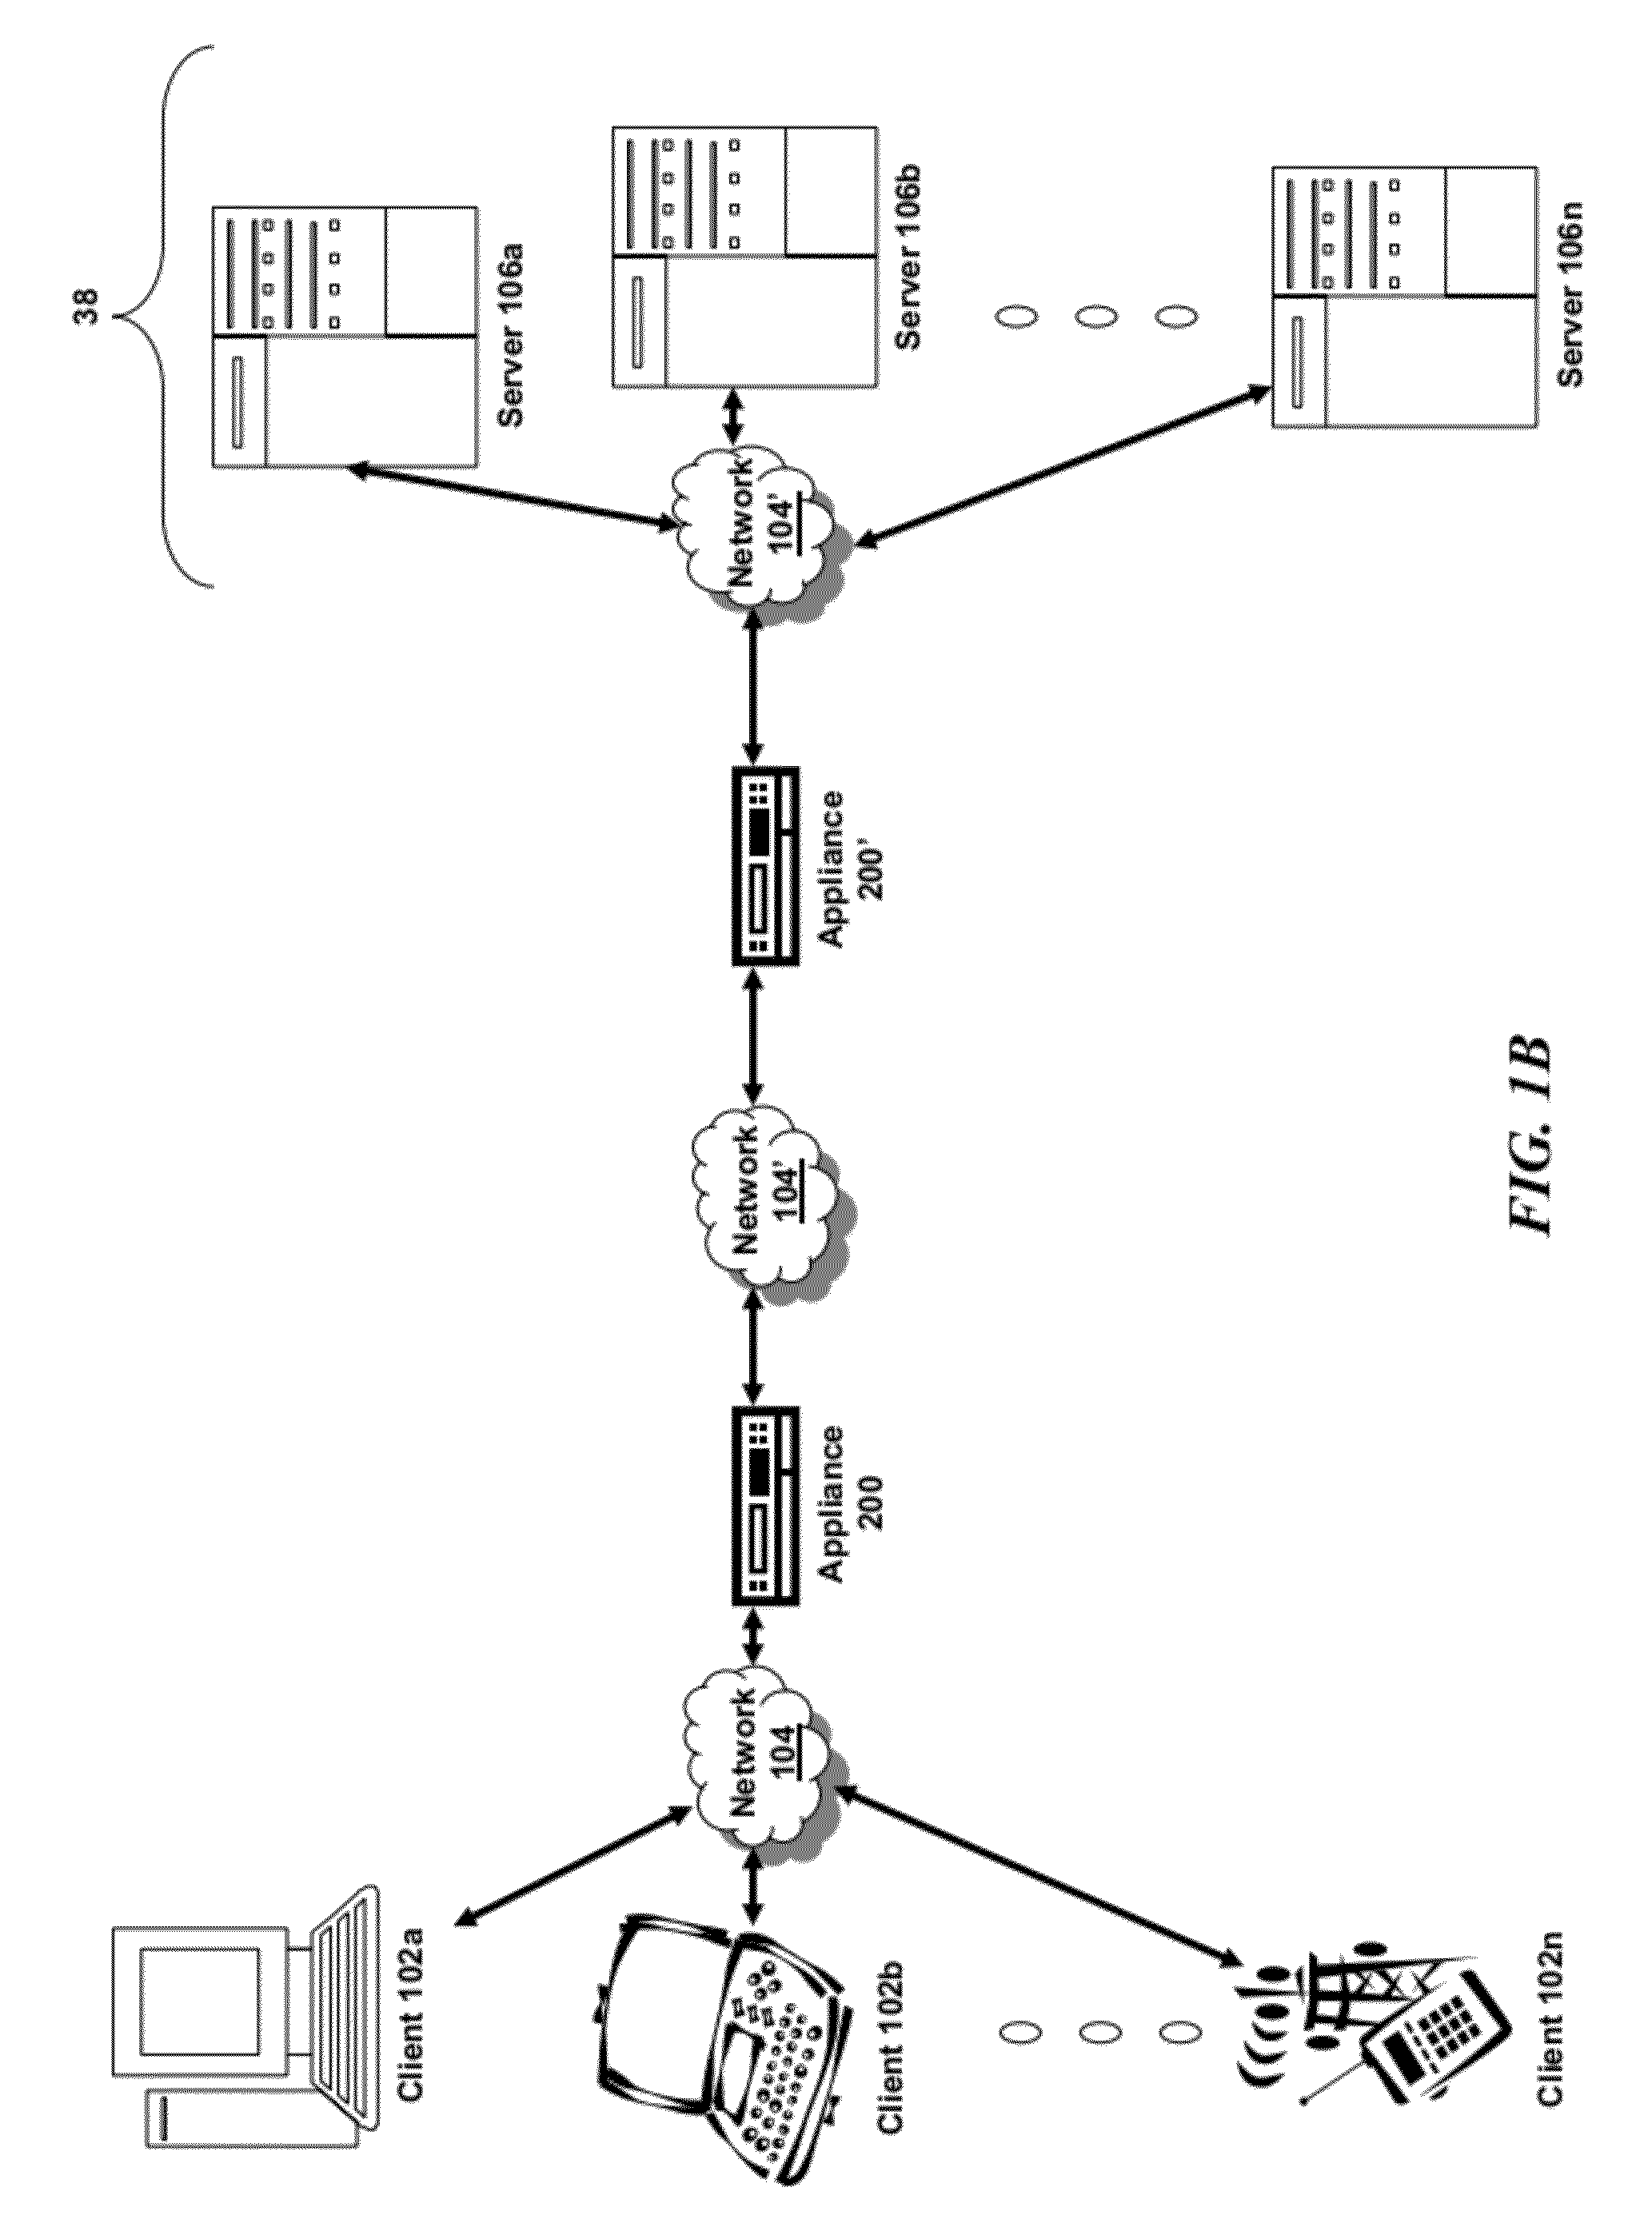 Systems and methods for cloud bridging between public and private clouds